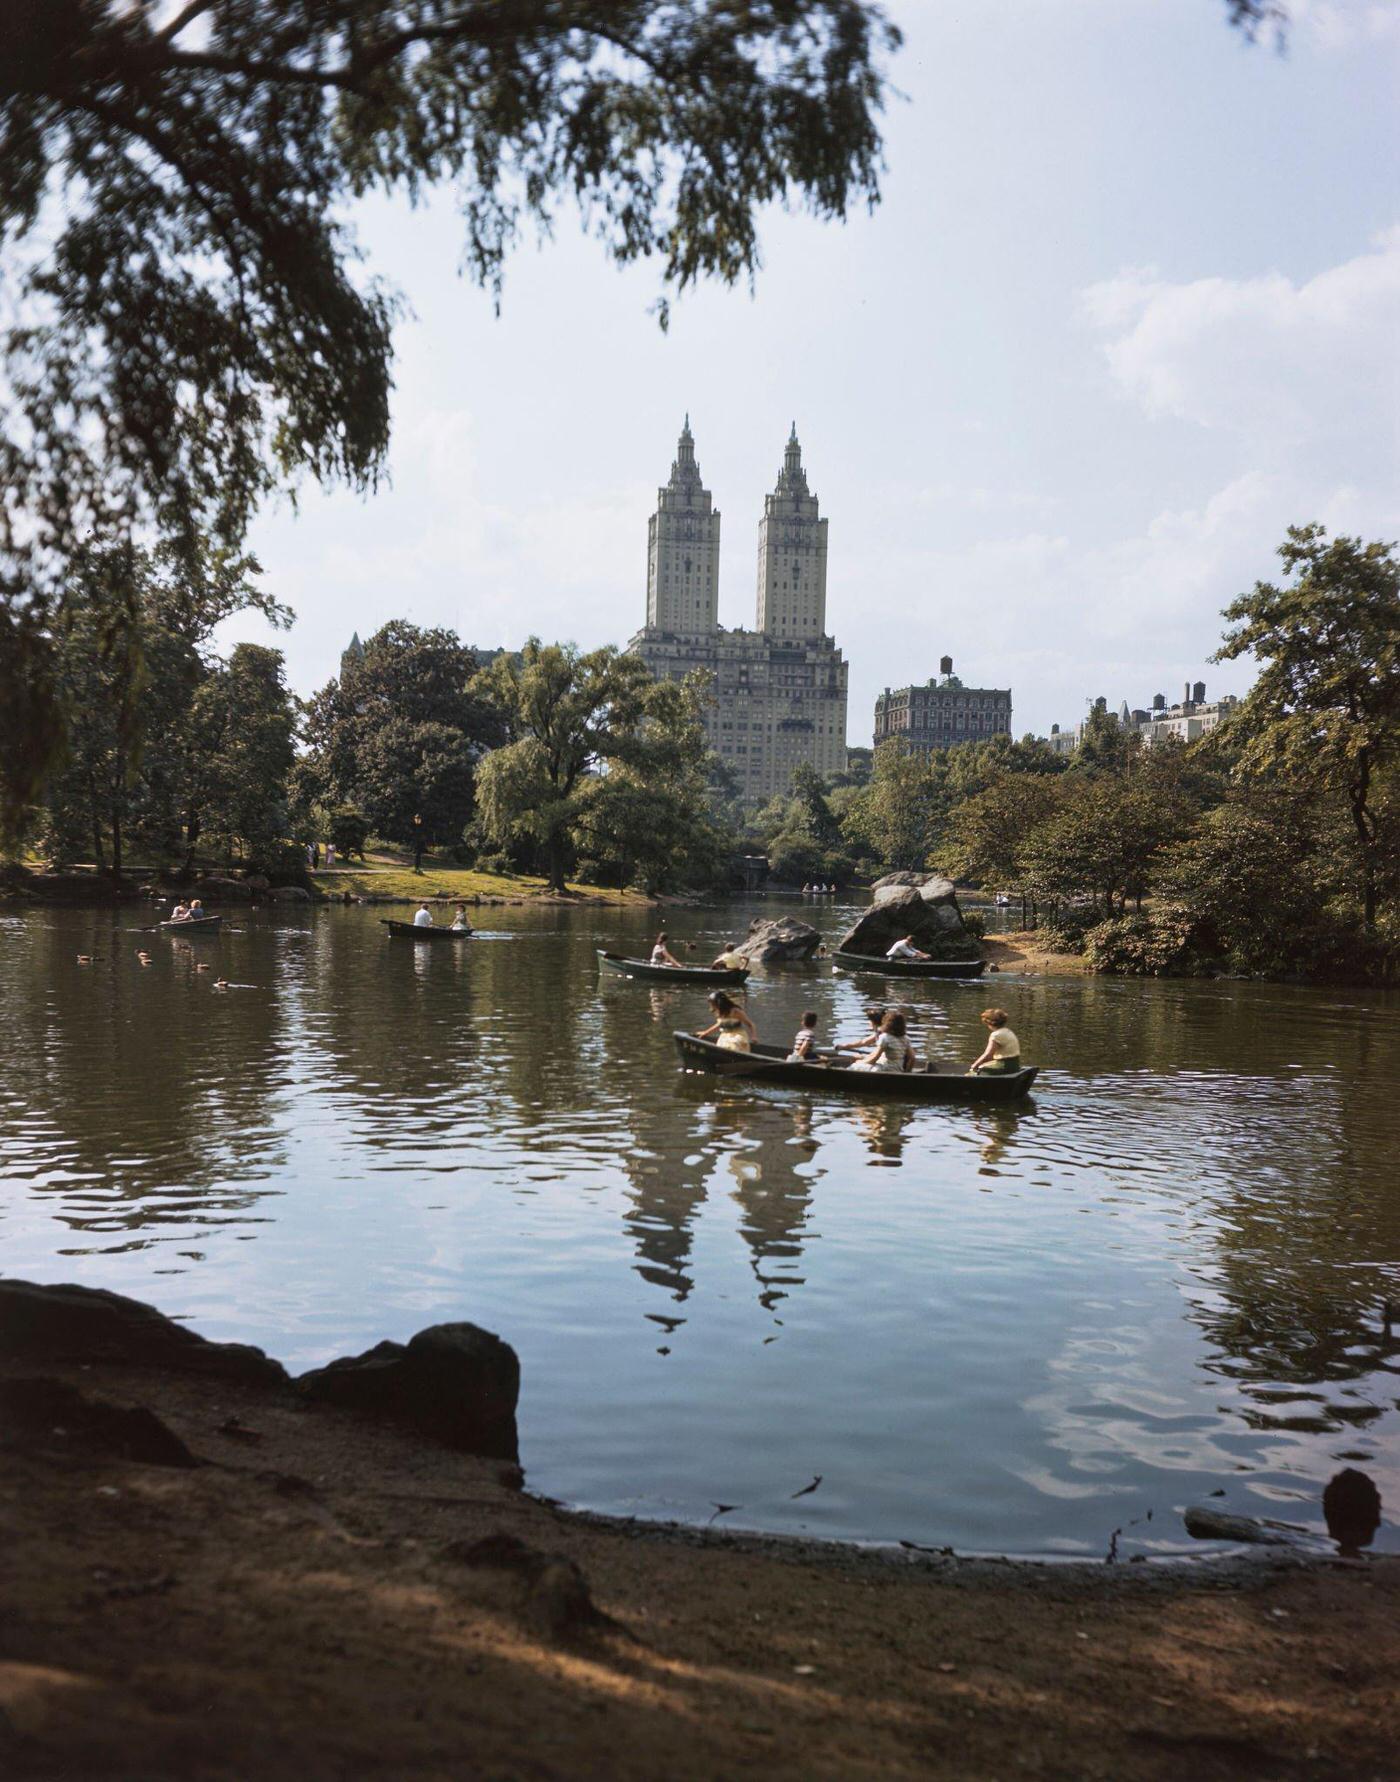 Visitors In Rowing Boats On Central Park Boating Lake, Manhattan, 1955.